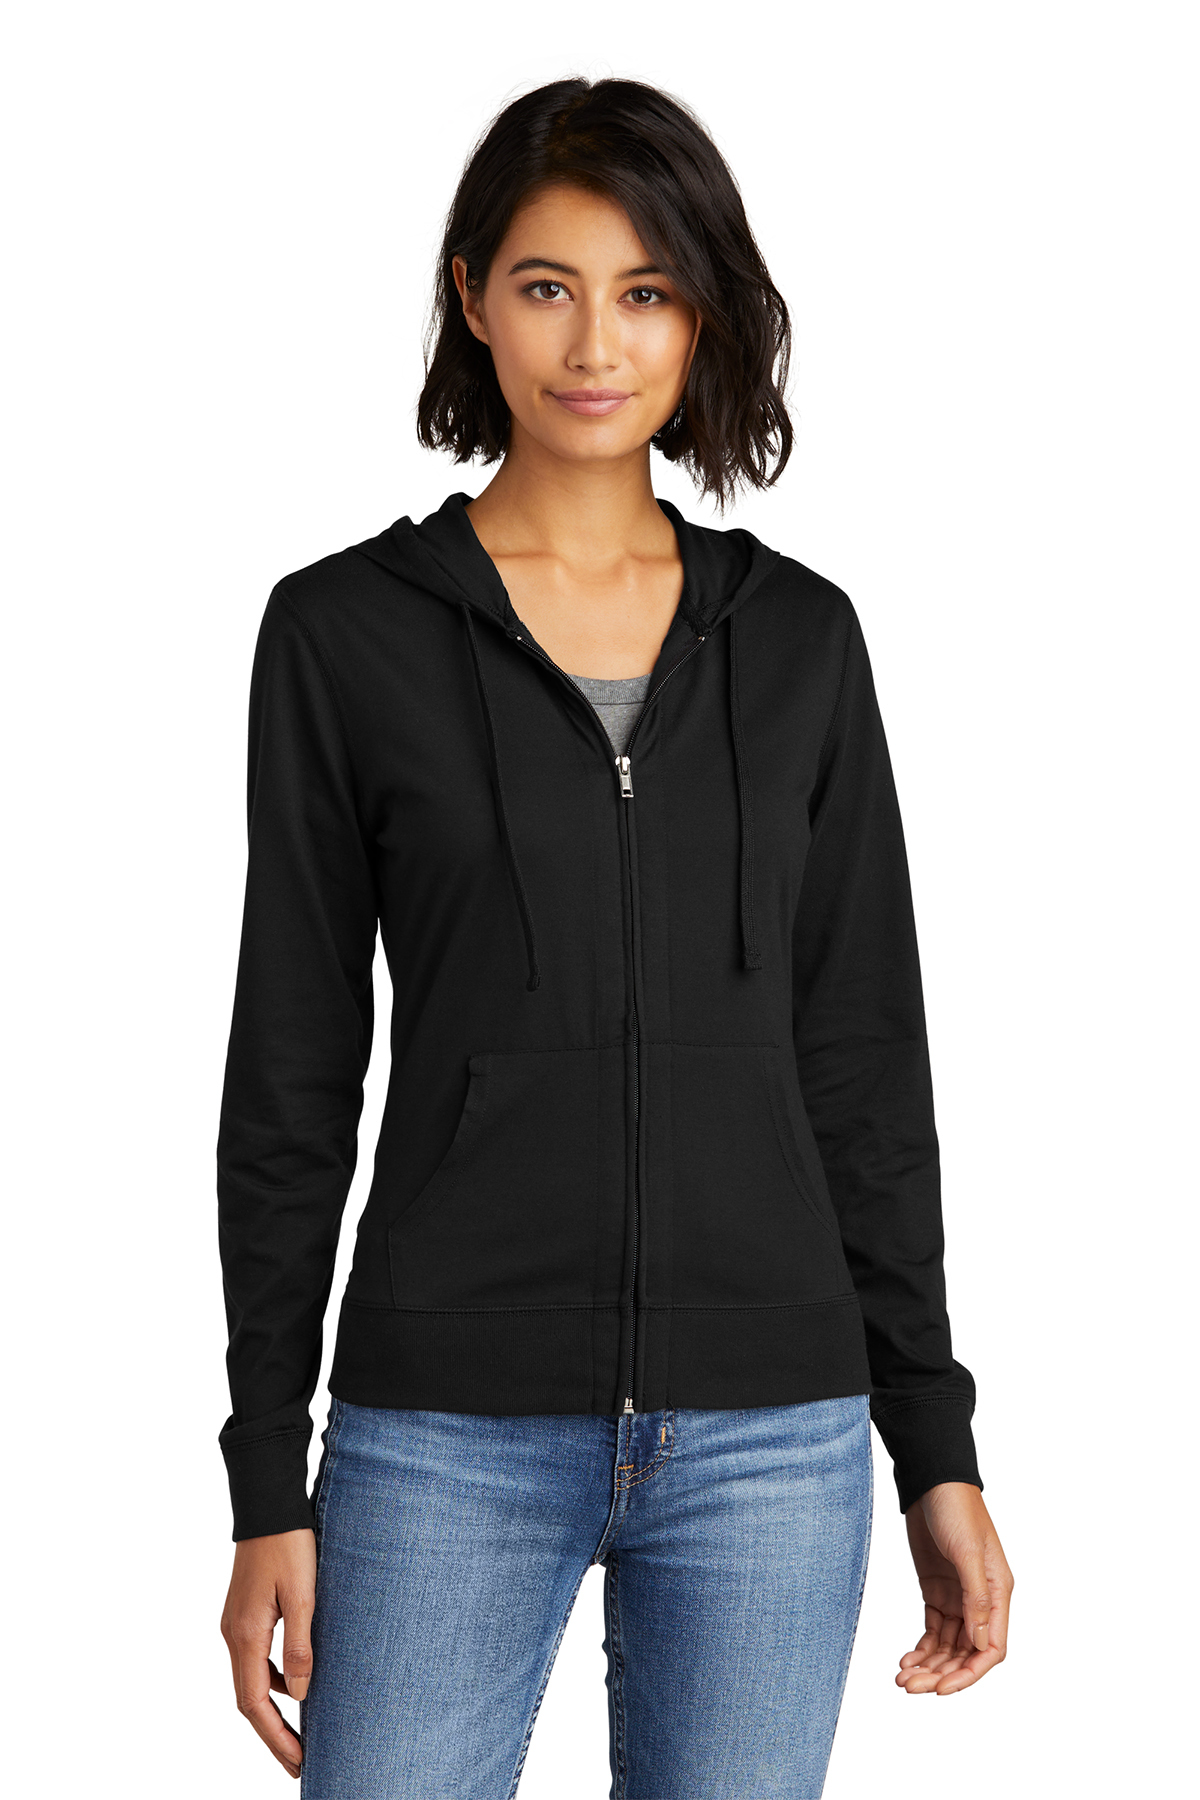 District Women's Fitted Jersey Full-Zip Hoodie, Product